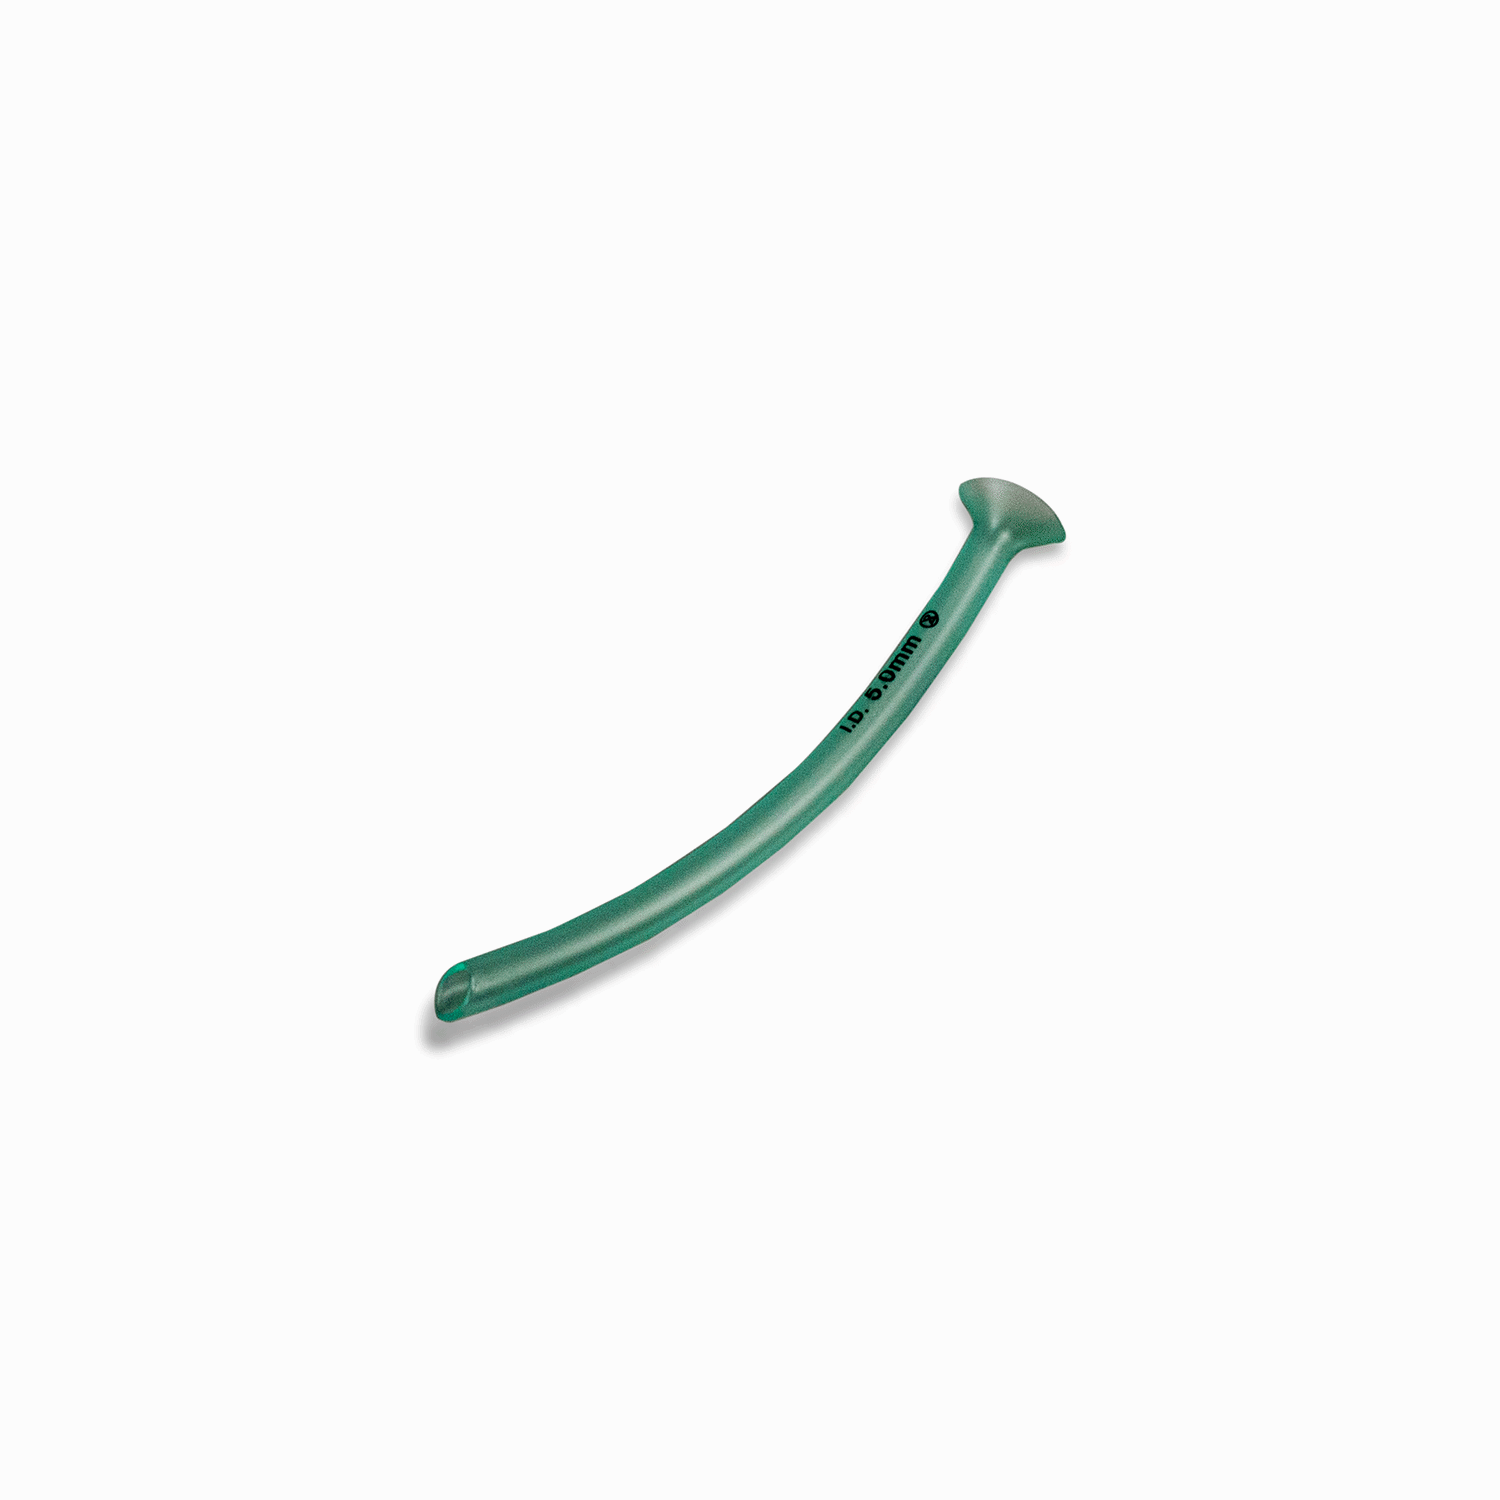 Uncuffed Endotracheal Tubes w/Stylette Products, Supplies and Equipment